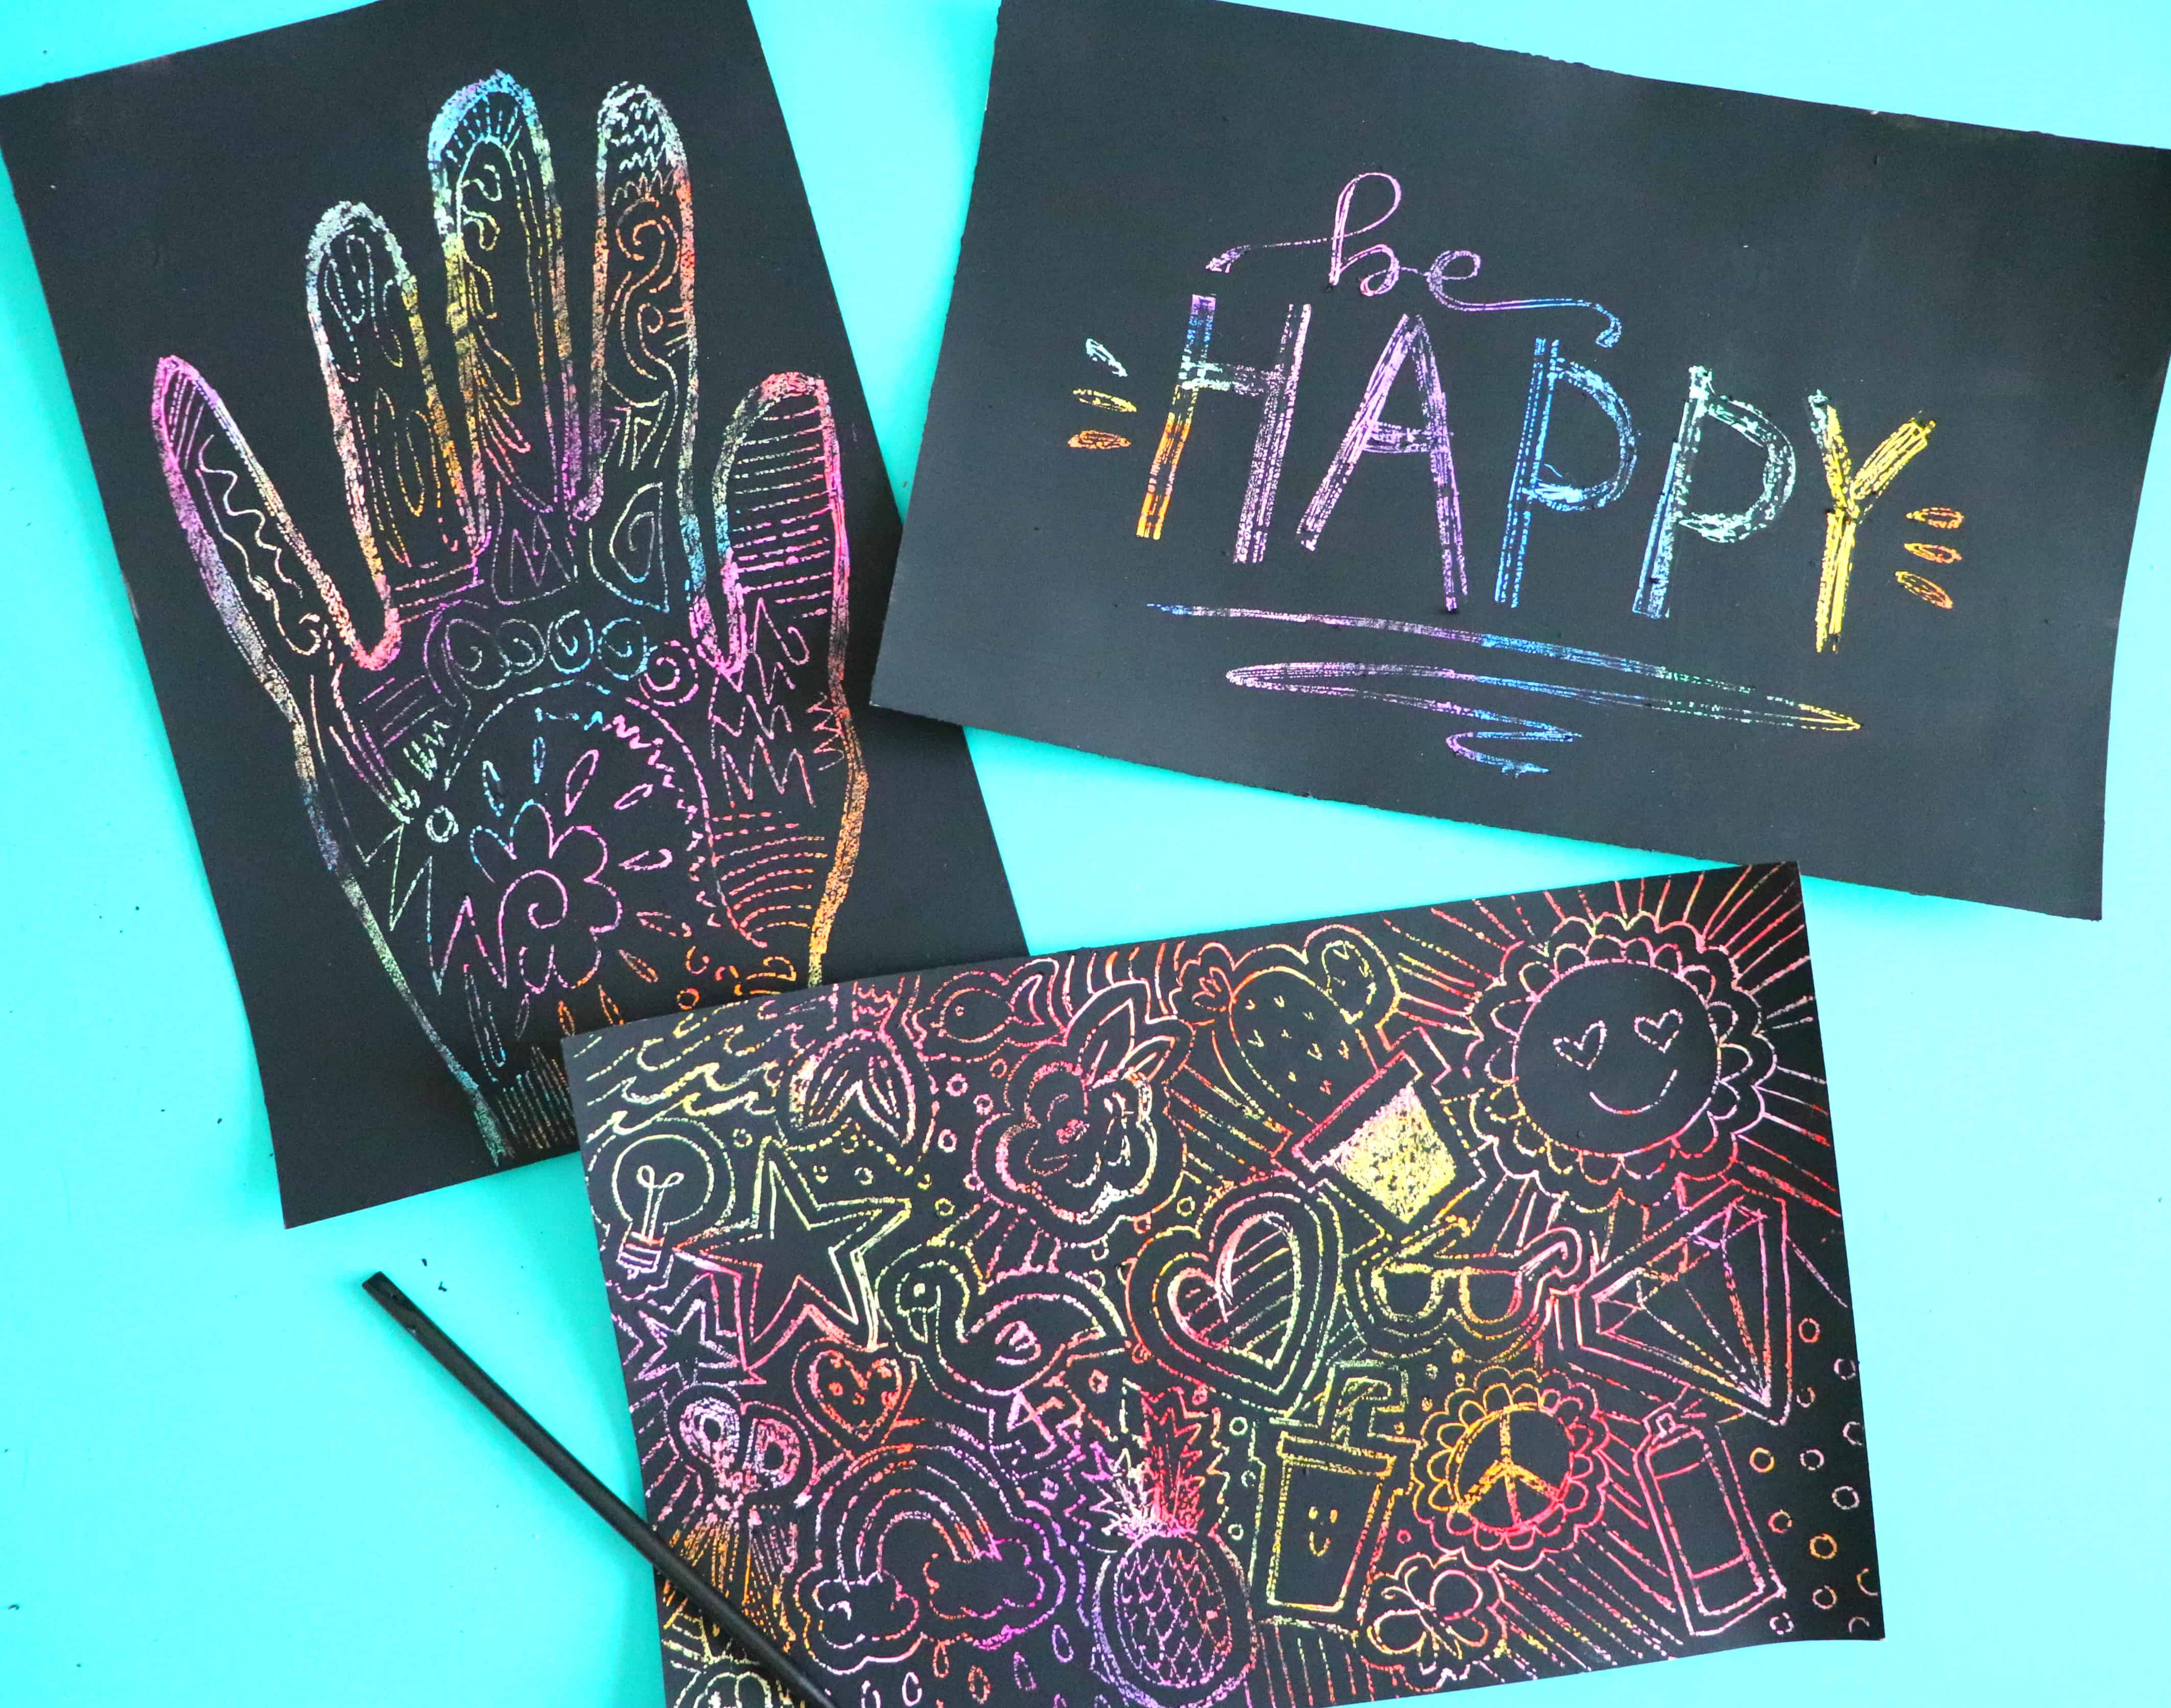 How to Make DIY Scratch Art For Kids